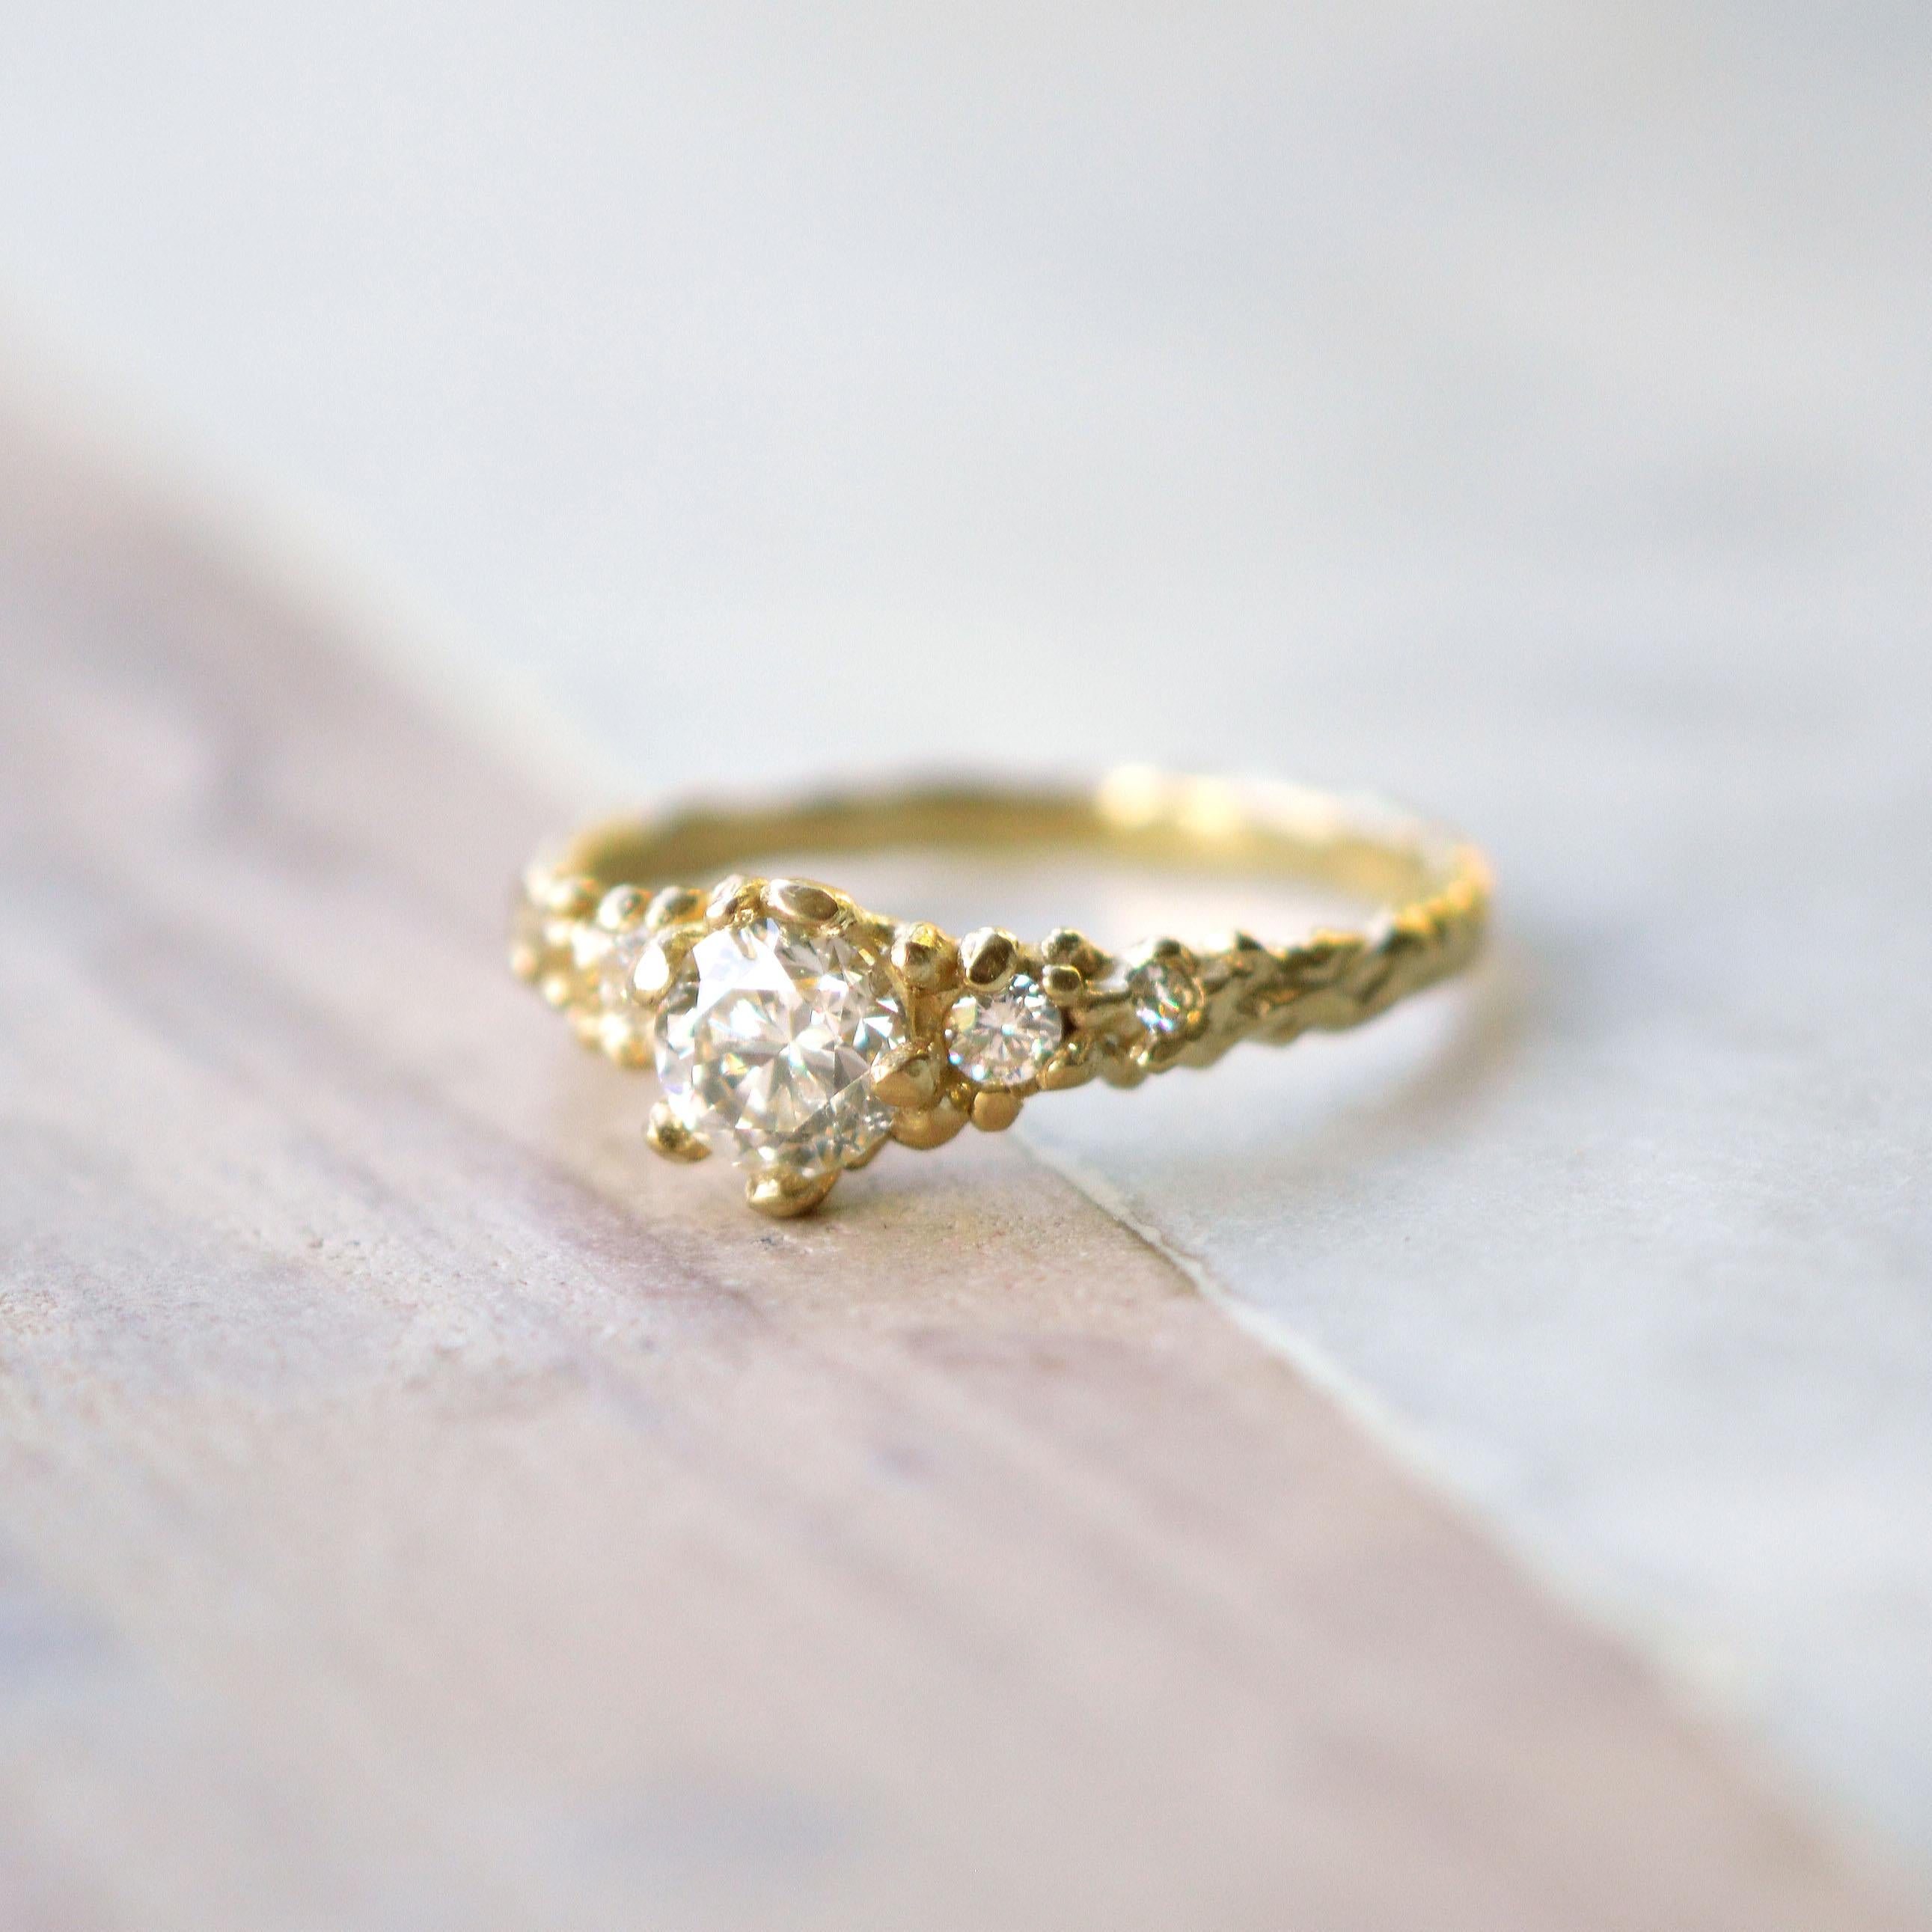 This charming ring has an 18ct gold earth inspired setting and includes a central 0.8ct antique cut ethically sourced diamond, with four brilliant cut accent diamonds on either side. This piece was created from Lucy's original hand-sculpted